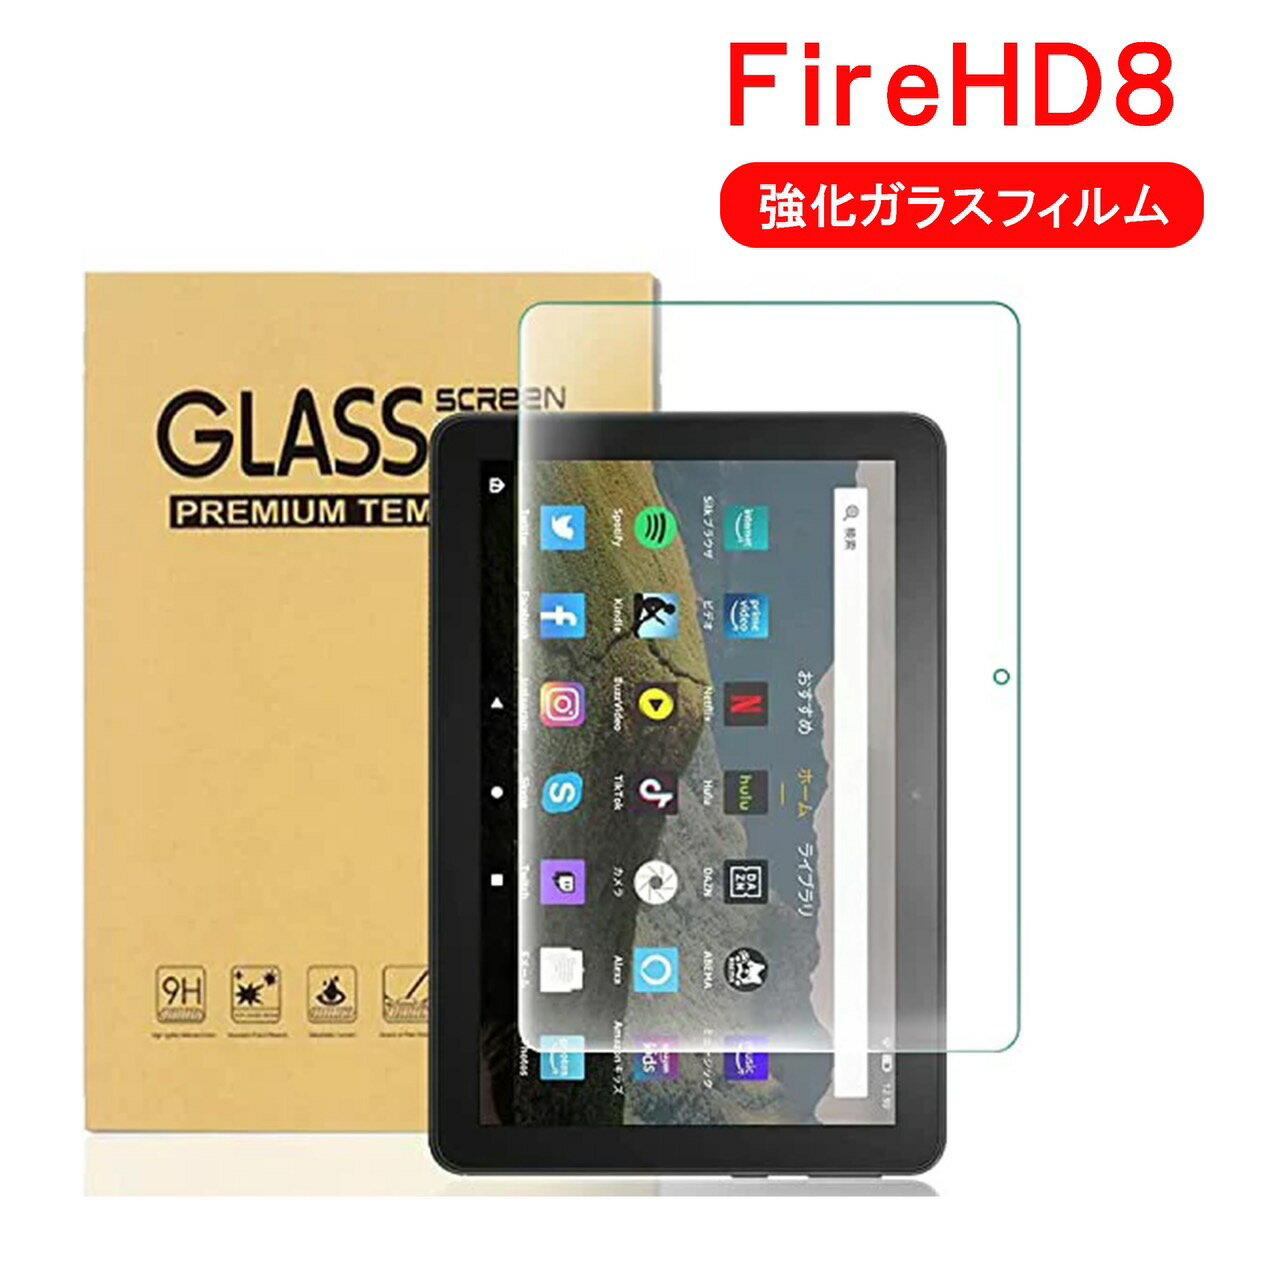 Fire HD 8 タブレット HD 8 Plus 2021 強化ガラスフィルム For fire HD 8 液晶保護フィルム ファイア タブレット